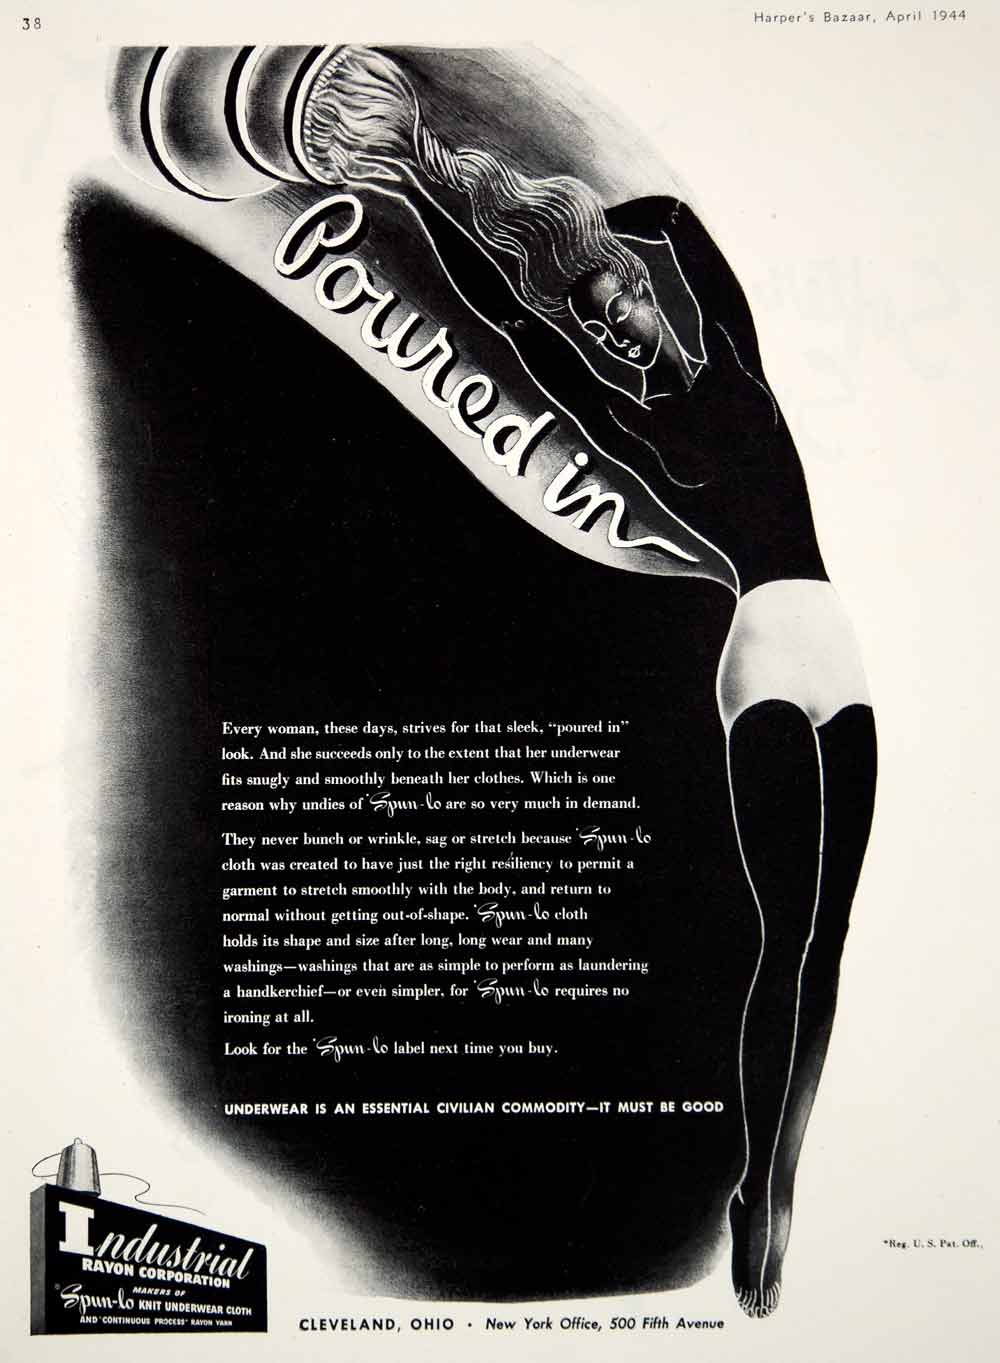 1977 advertisement for Formfit bras : Free Download, Borrow, and Streaming  : Internet Archive